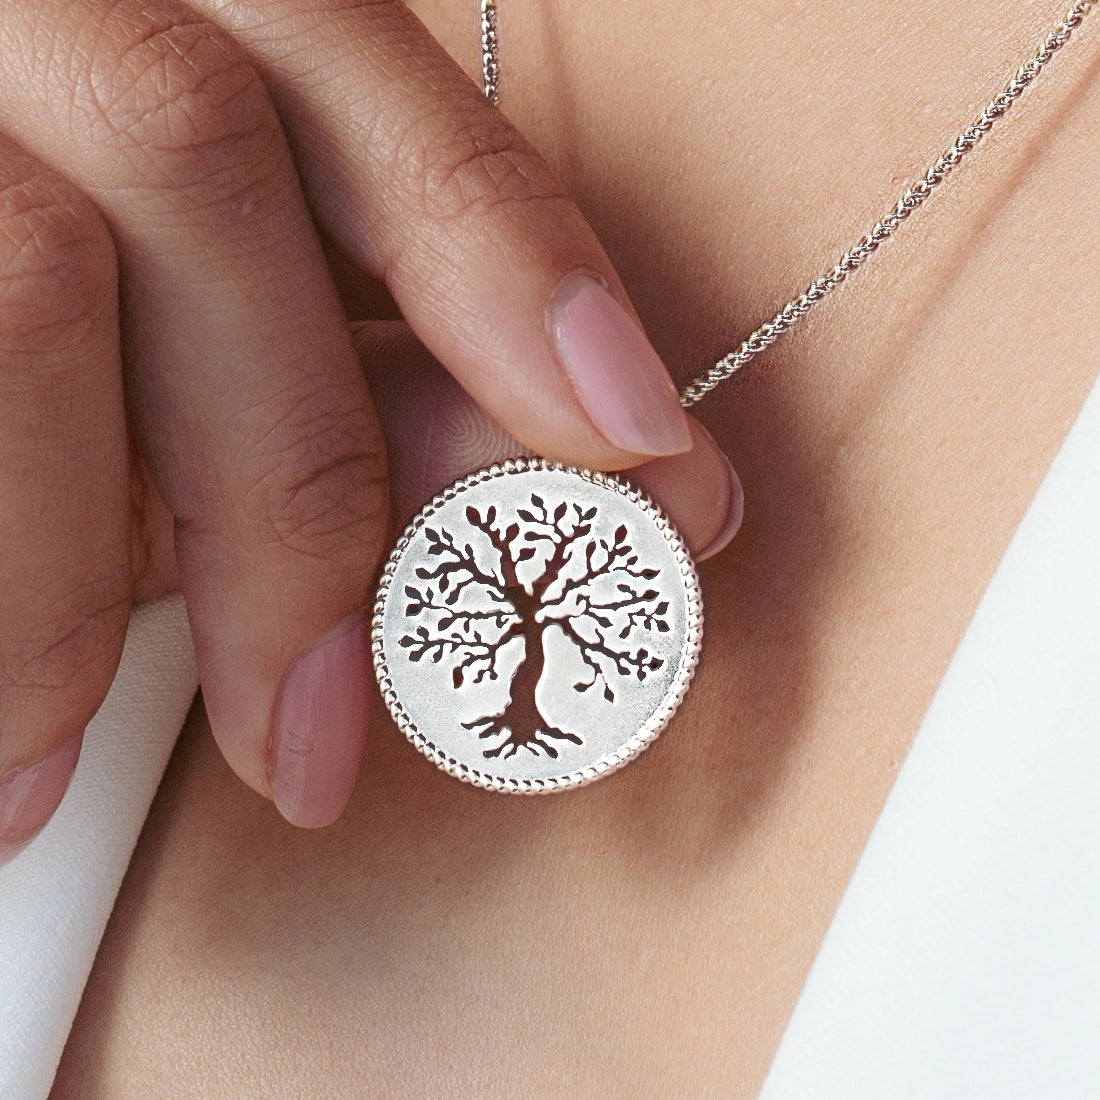 Close up of christian woman holding and wearing the sterling silver Olive Tree Necklace from the Rooted Collection by Rizen Jewelry.